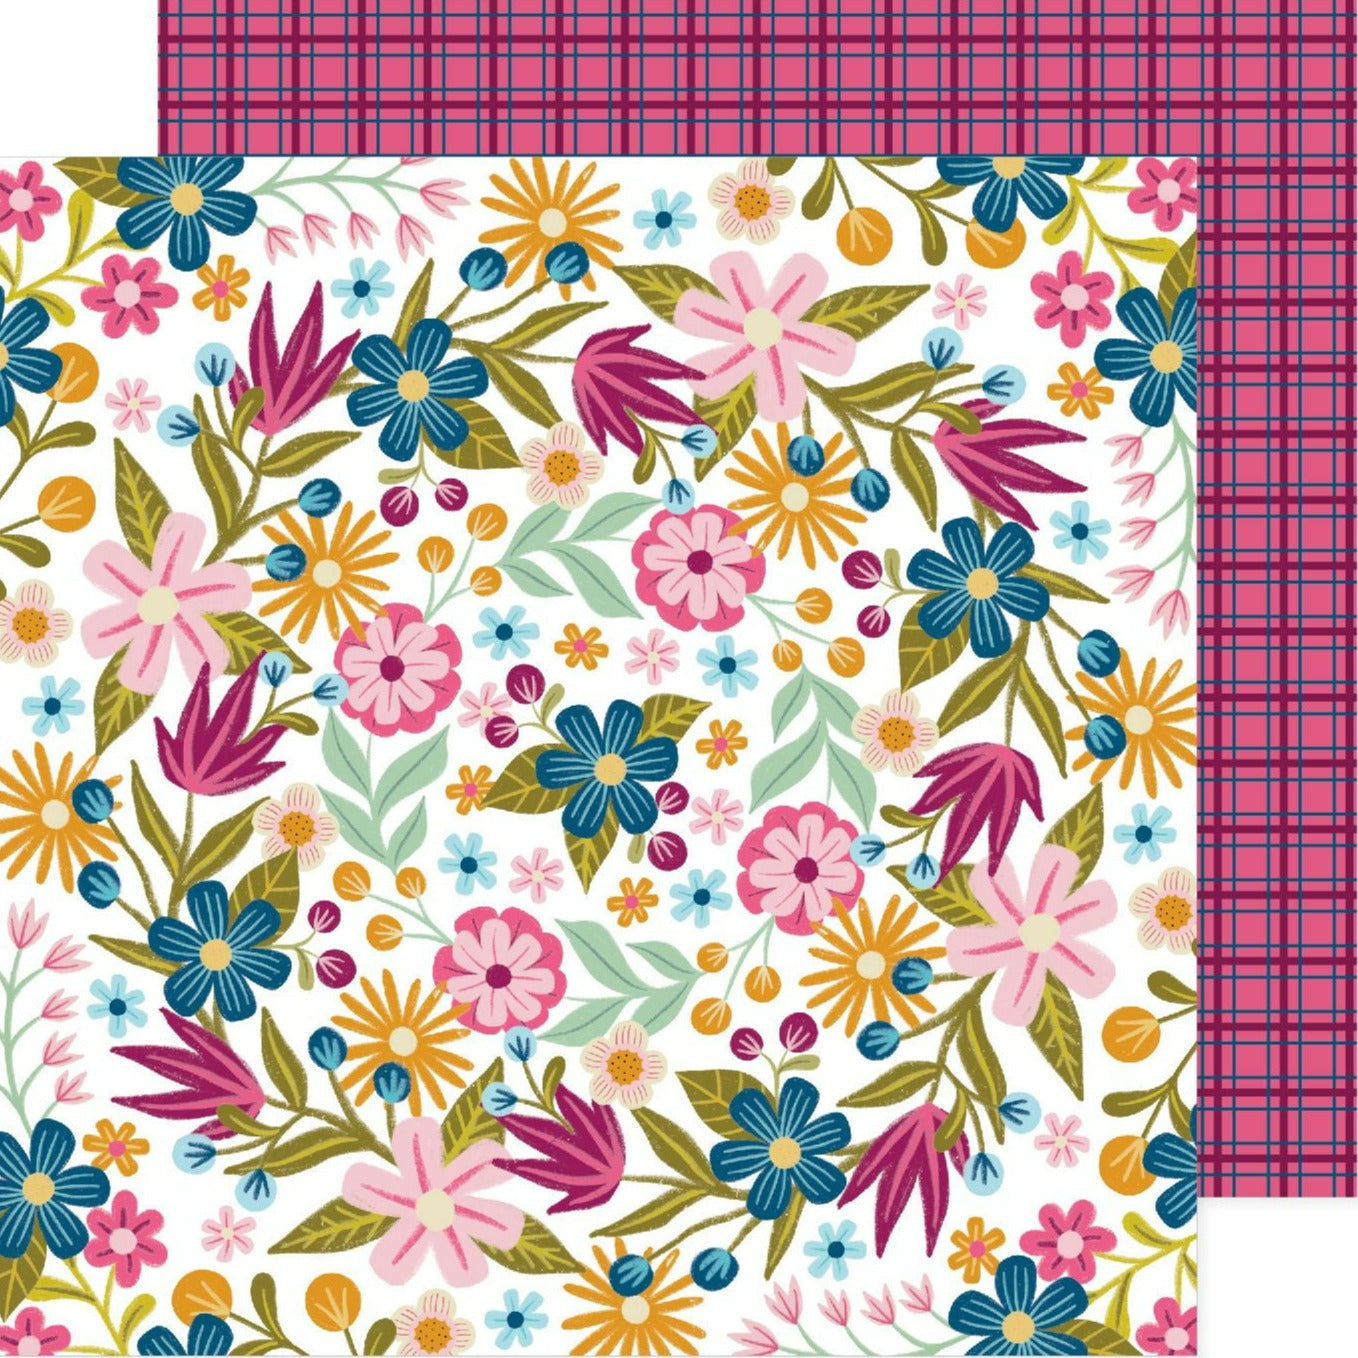 Pink Paislee's double-sided 12x12 paper features a white background adorned with whimsical pink, blue, and orange flowers with green leaves on one side and pink plaid in matching colors on the other.